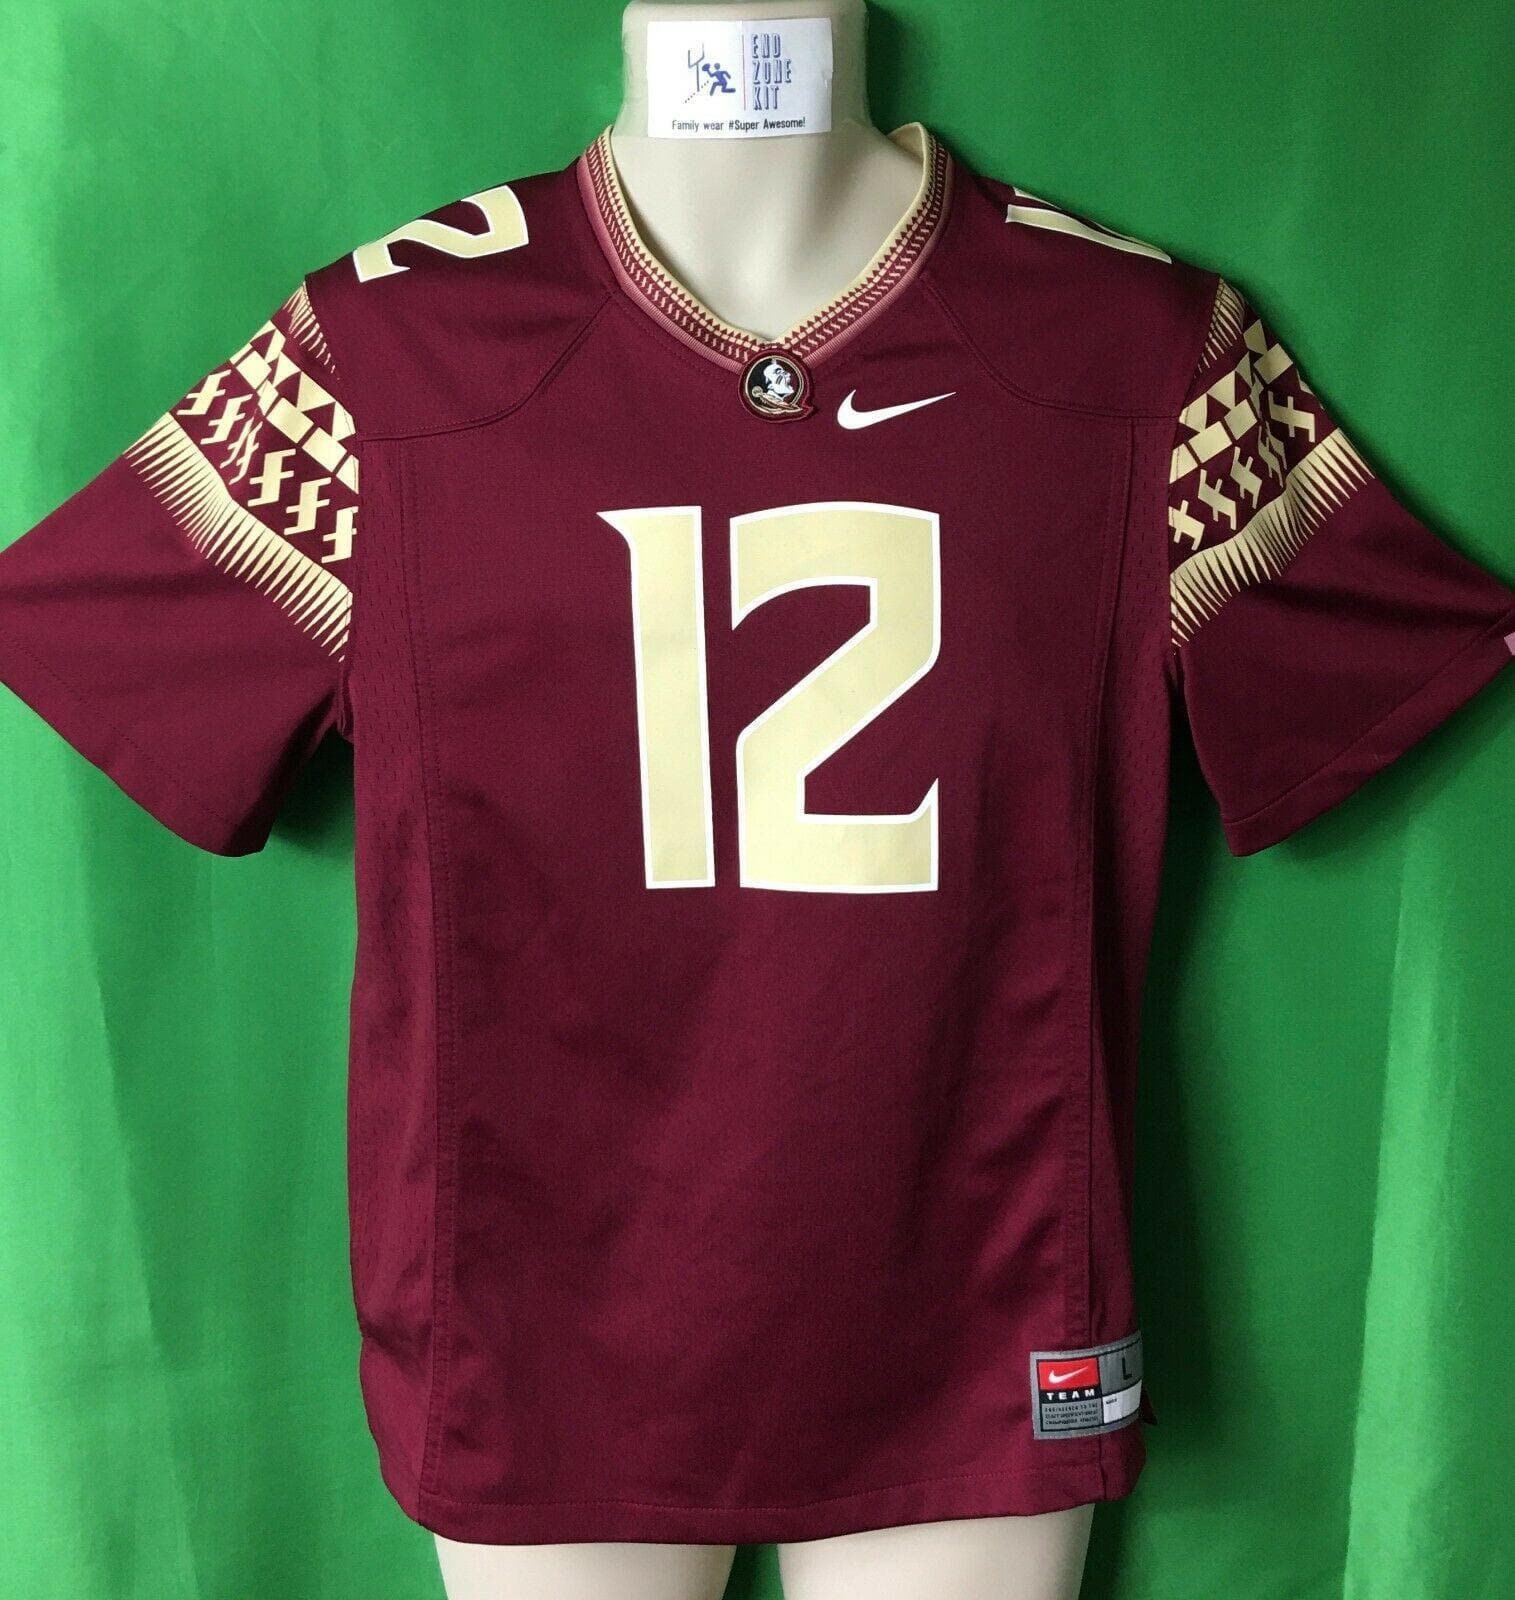 NCAA Florida State Seminoles Patterned Jersey Youth Large 14-16